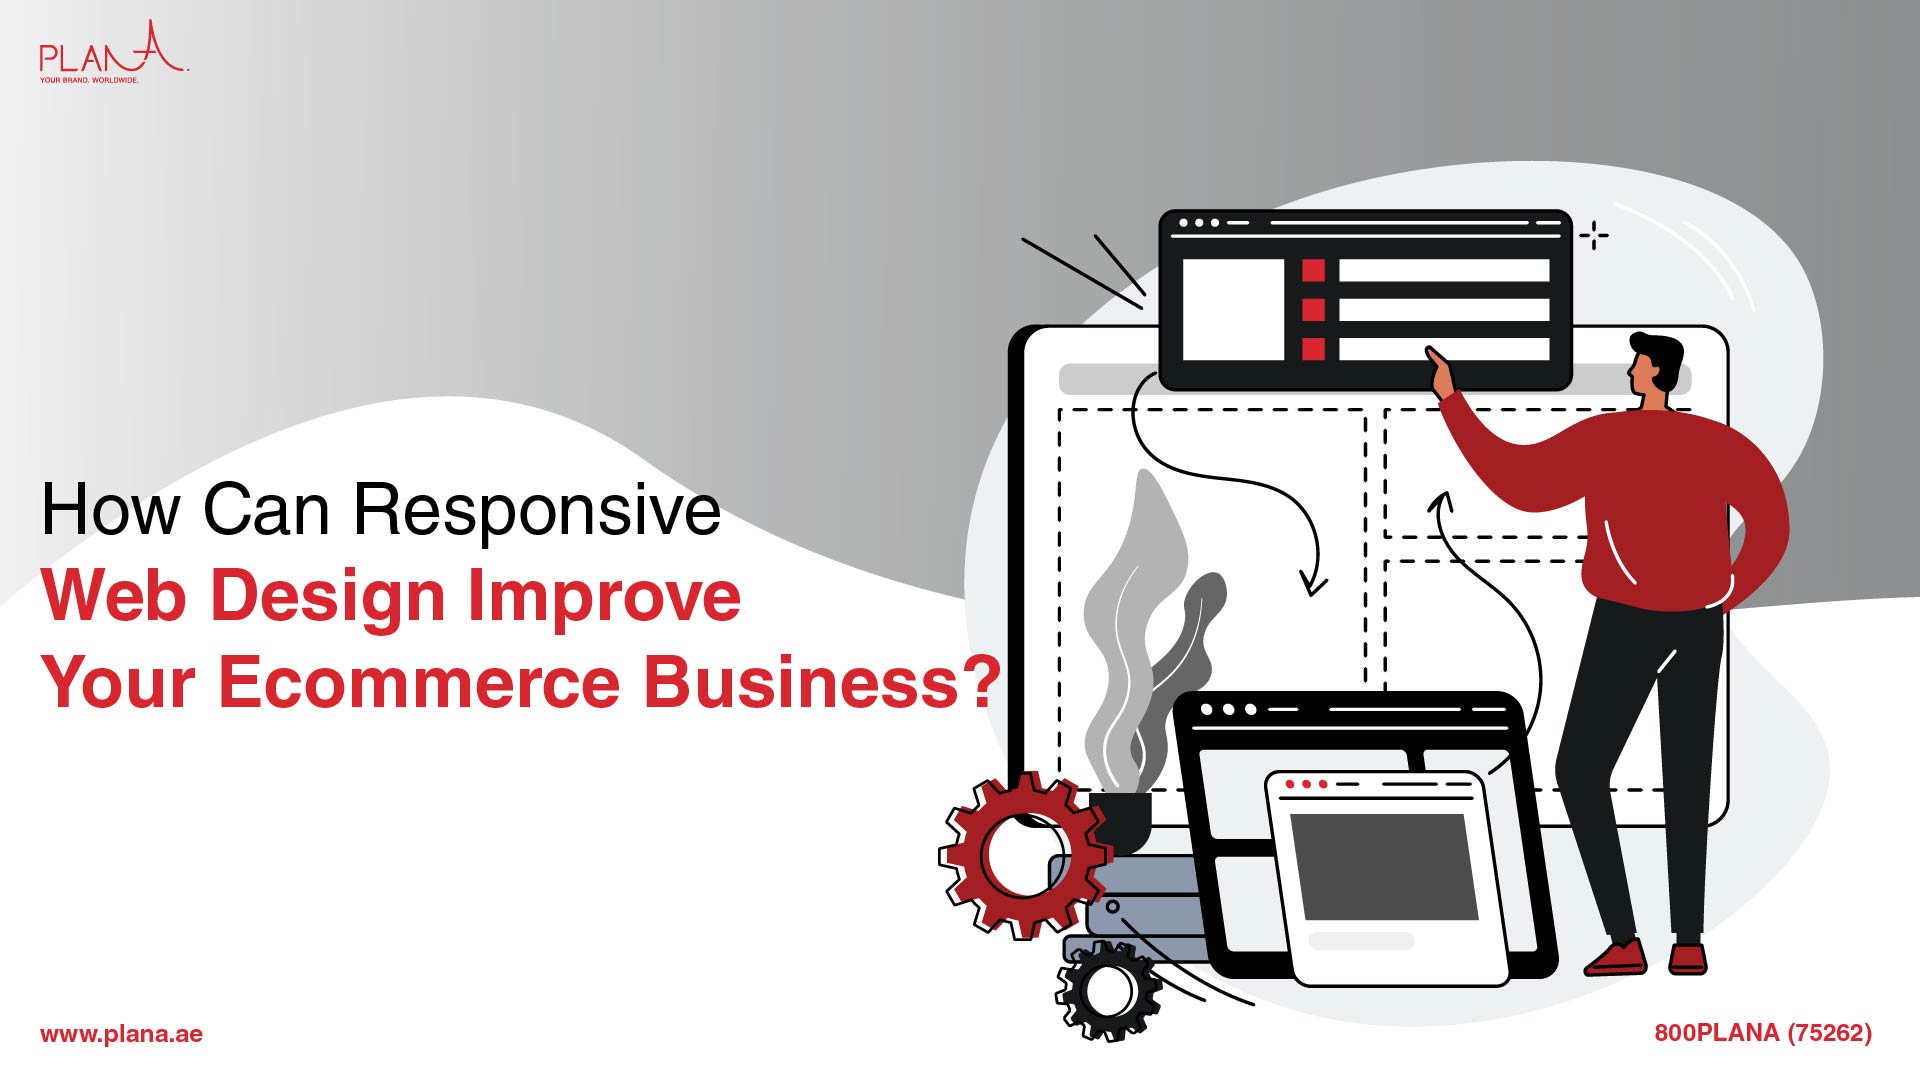 How Can Responsive Web Design Improve Your Ecommerce Business?